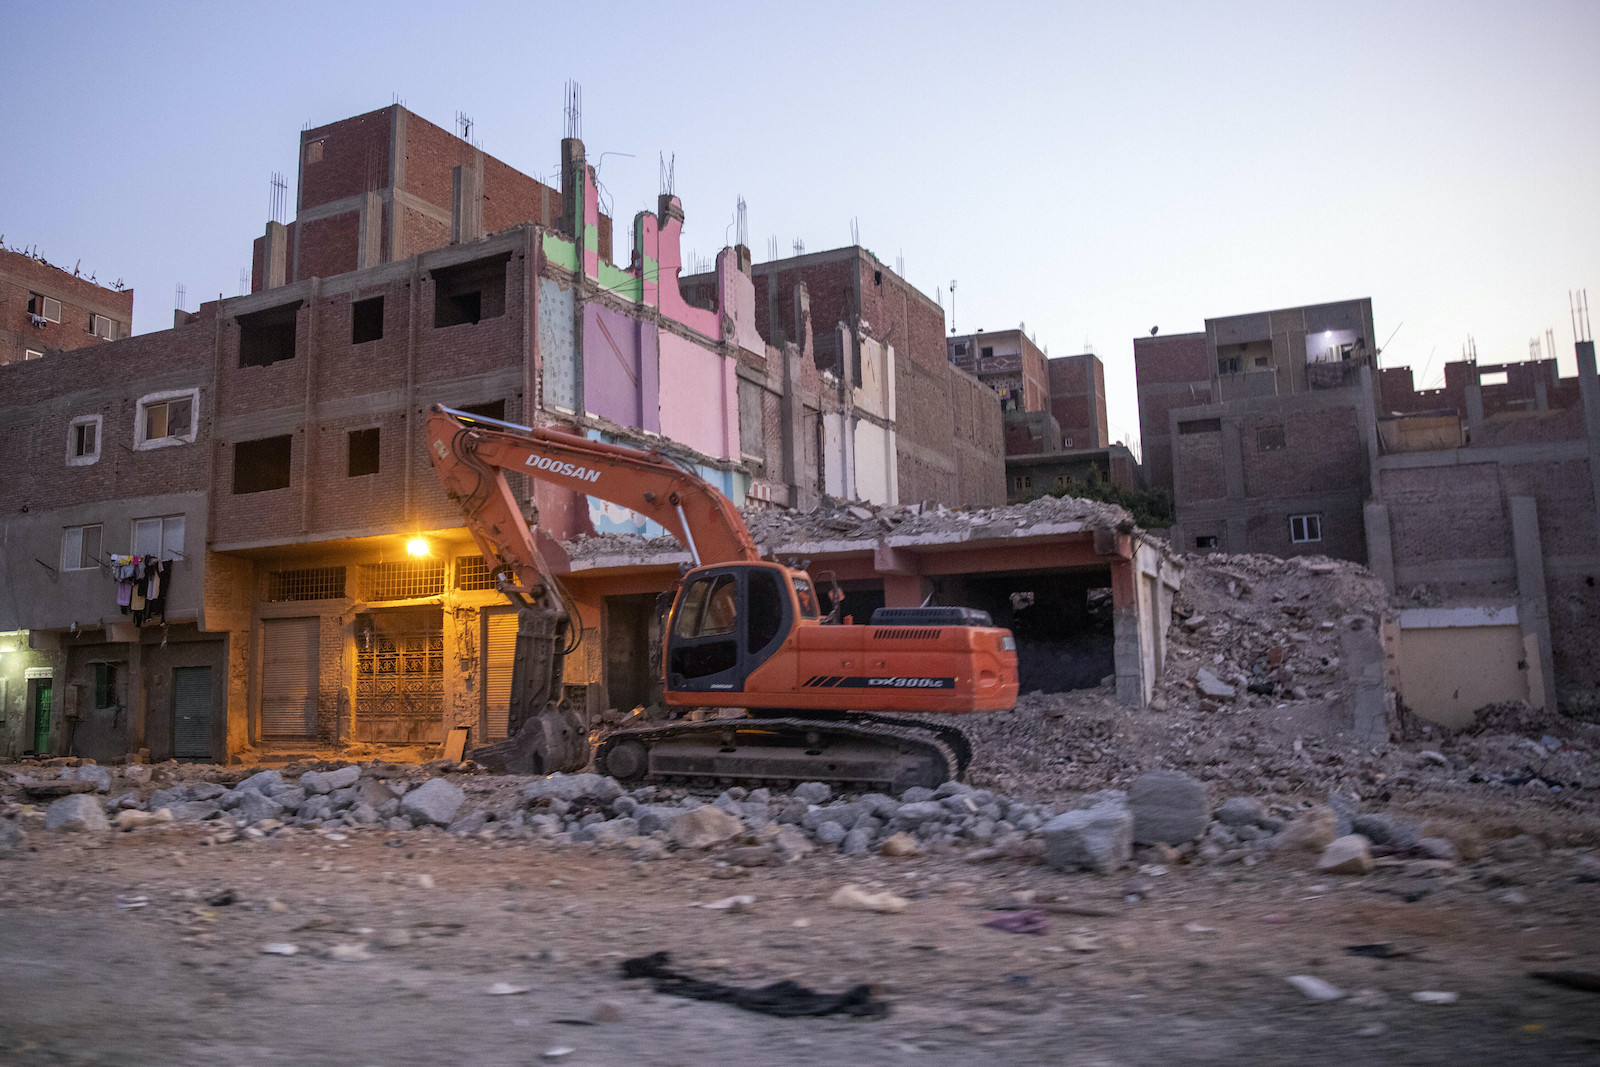 a bulldozer moves rubble from a housing site in a city